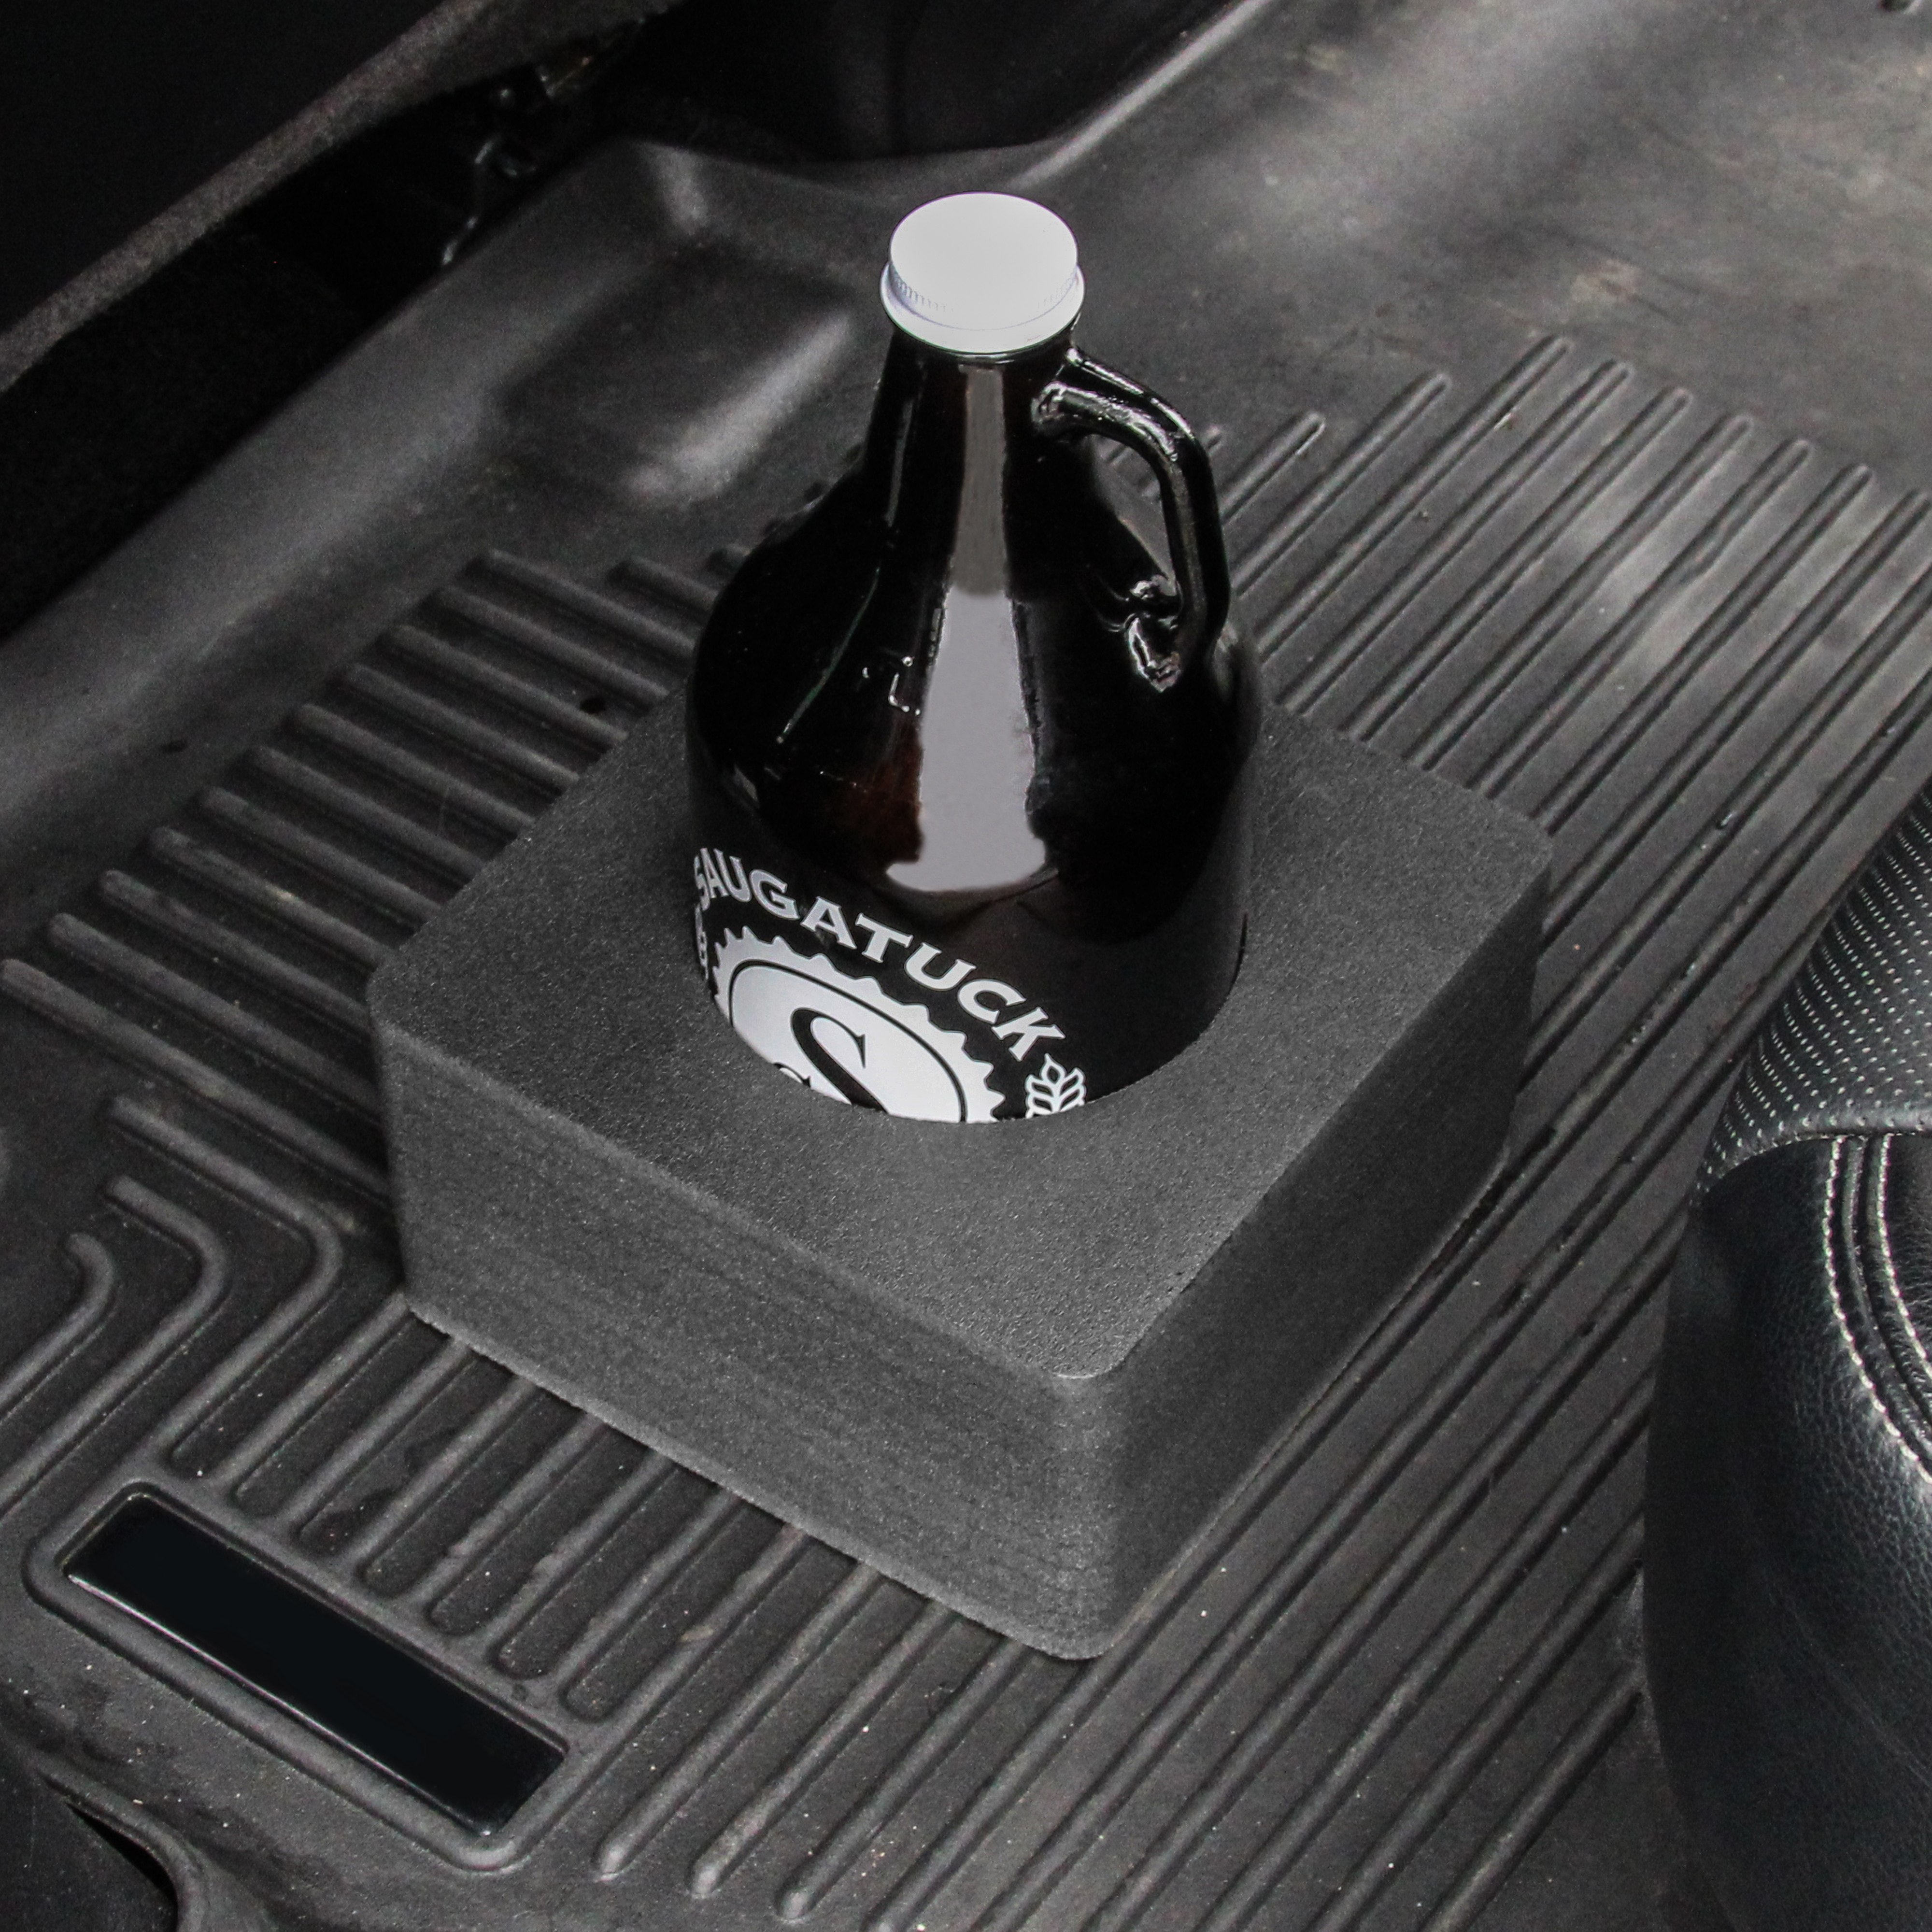 Growler Holder Durable Foam Organizer Transport Protector Bottle Car Truck SUV Van Seat Travel Protection 8 x 8 x 4 Inches Holds 1 Growler Bottle